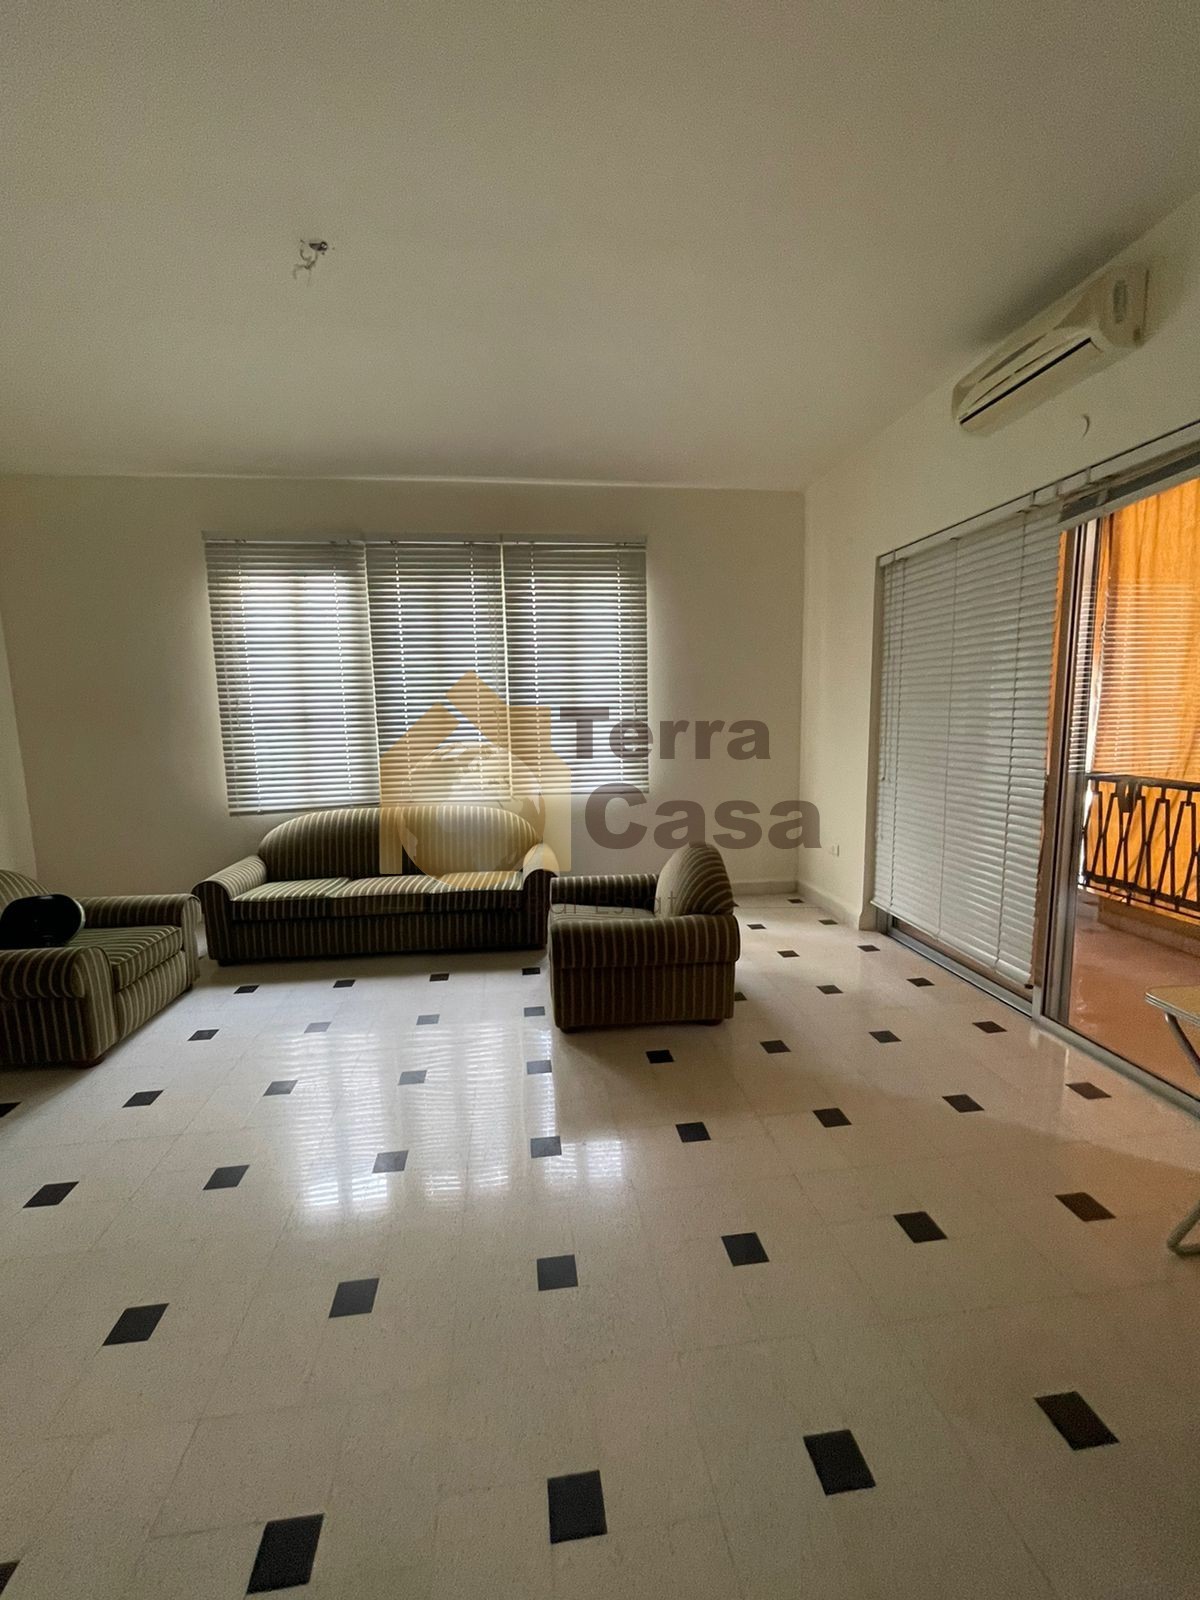 Rmeil fully furnished apartment for rent.